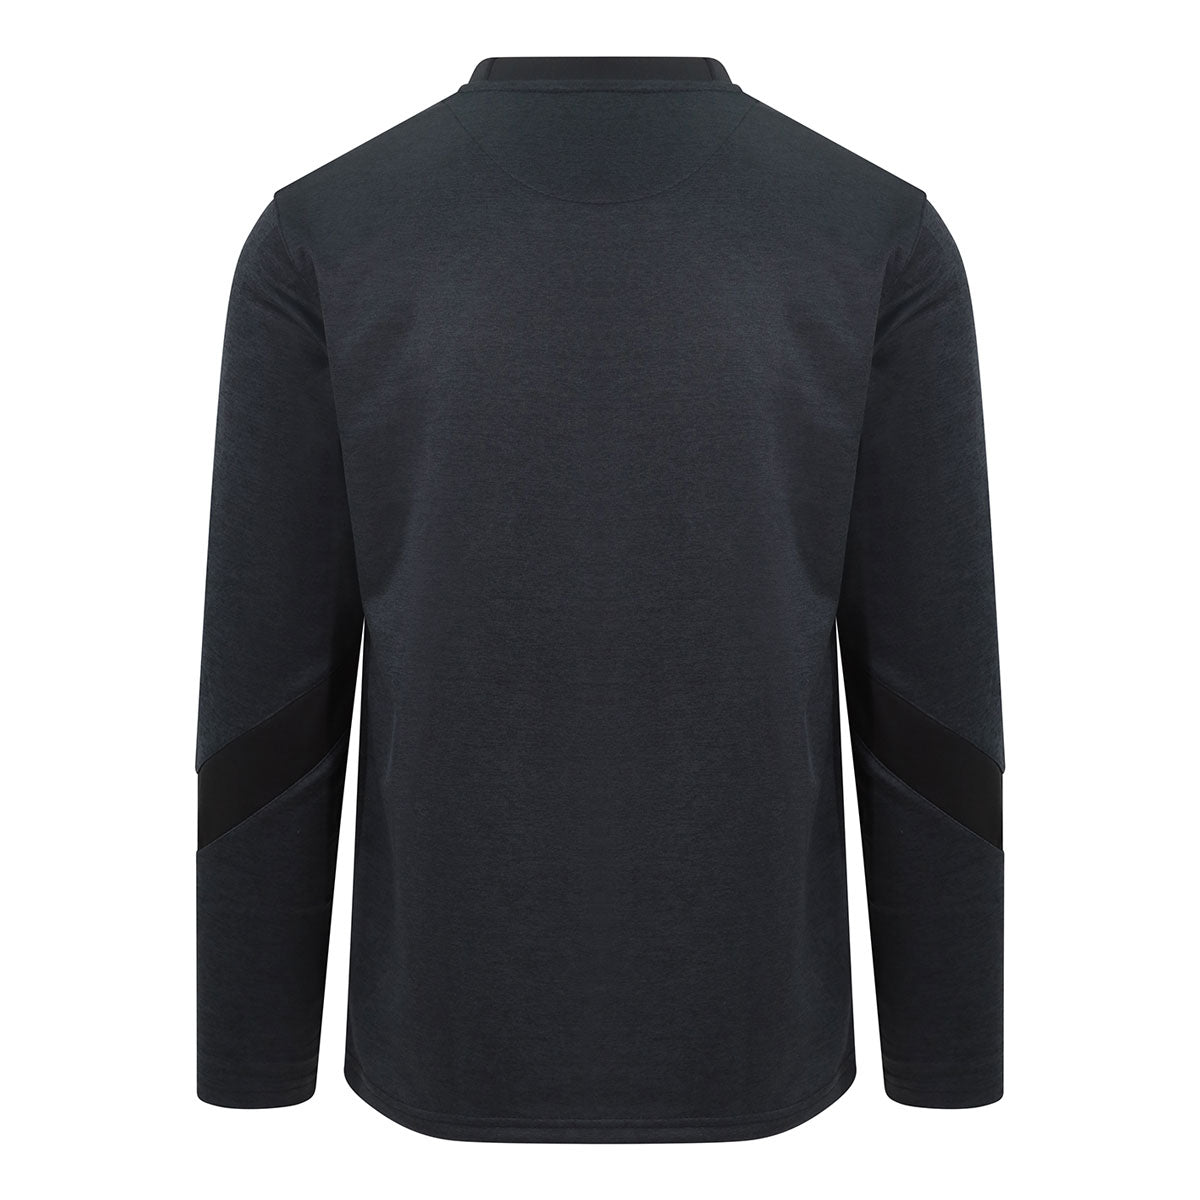 Mc Keever Naomh Mearnog CLG Core 22 Sweat Top - Adult - Black